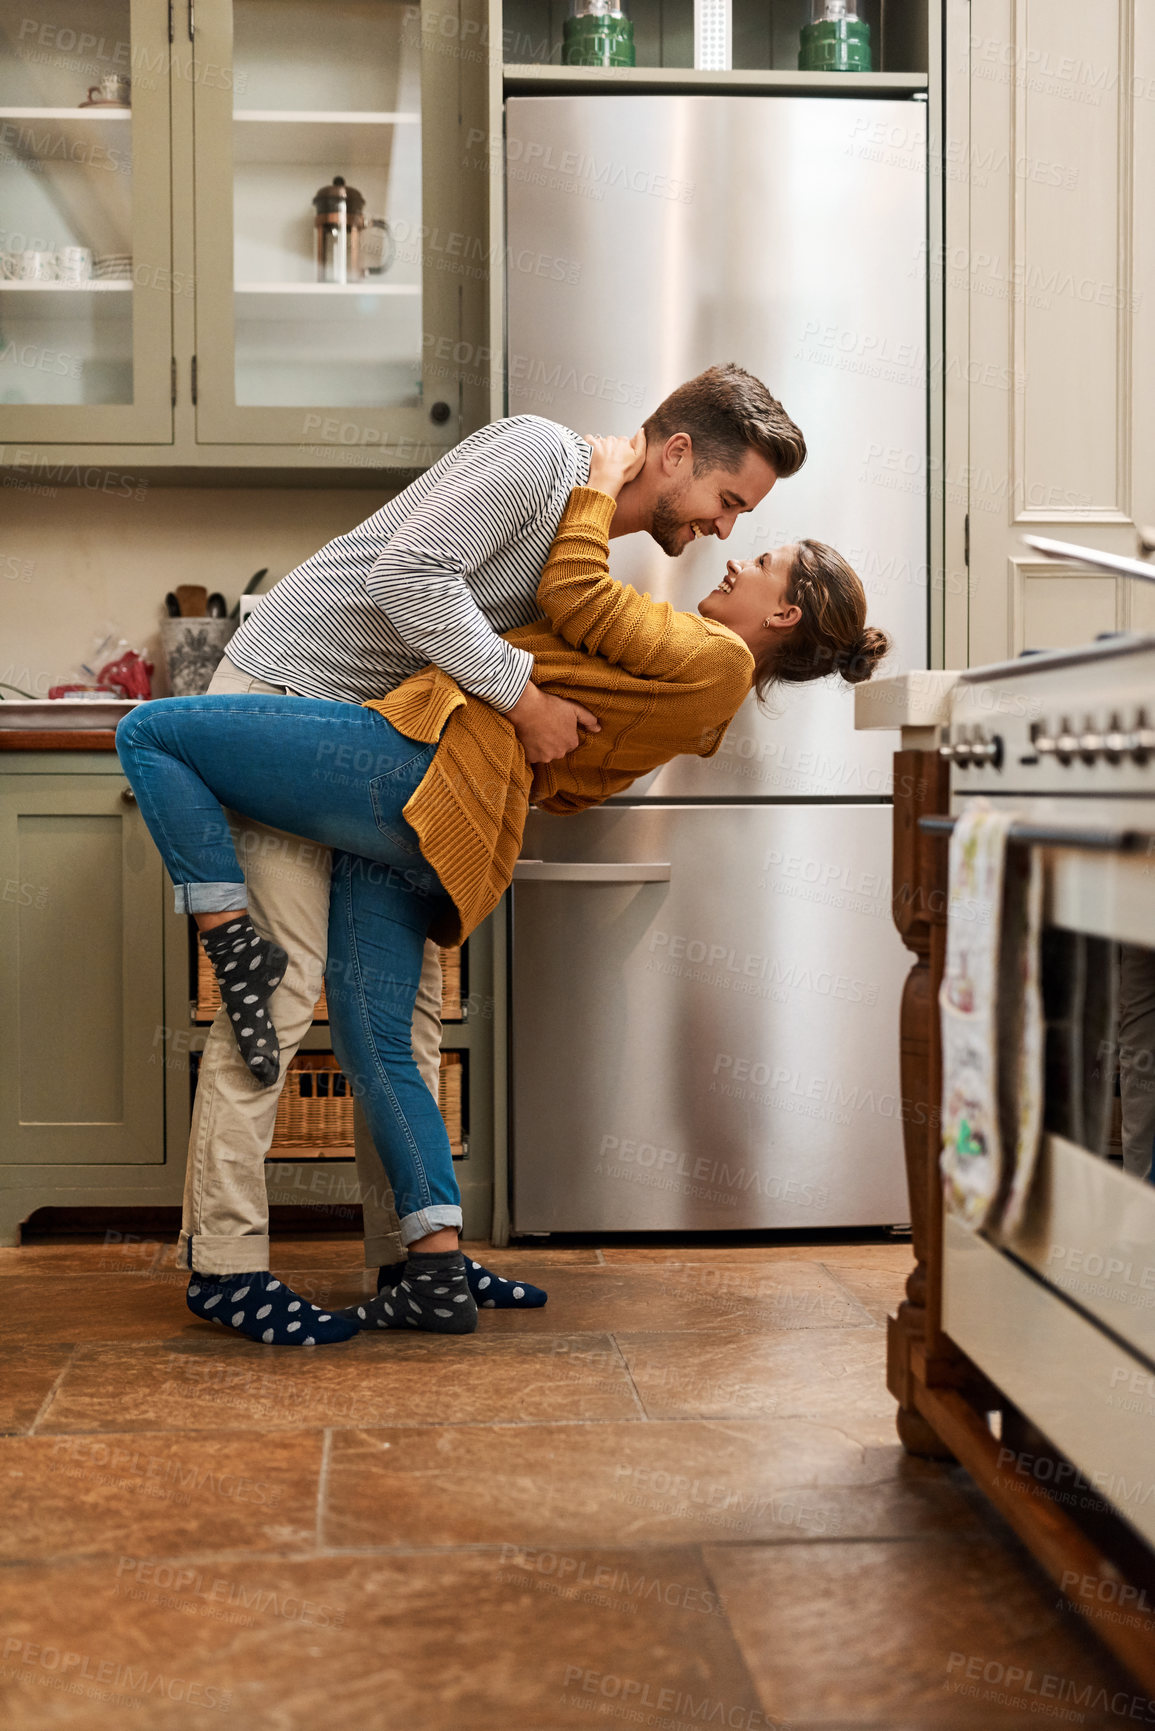 Buy stock photo Full length shot of an affectionate young couple dancing together in their kitchen at come